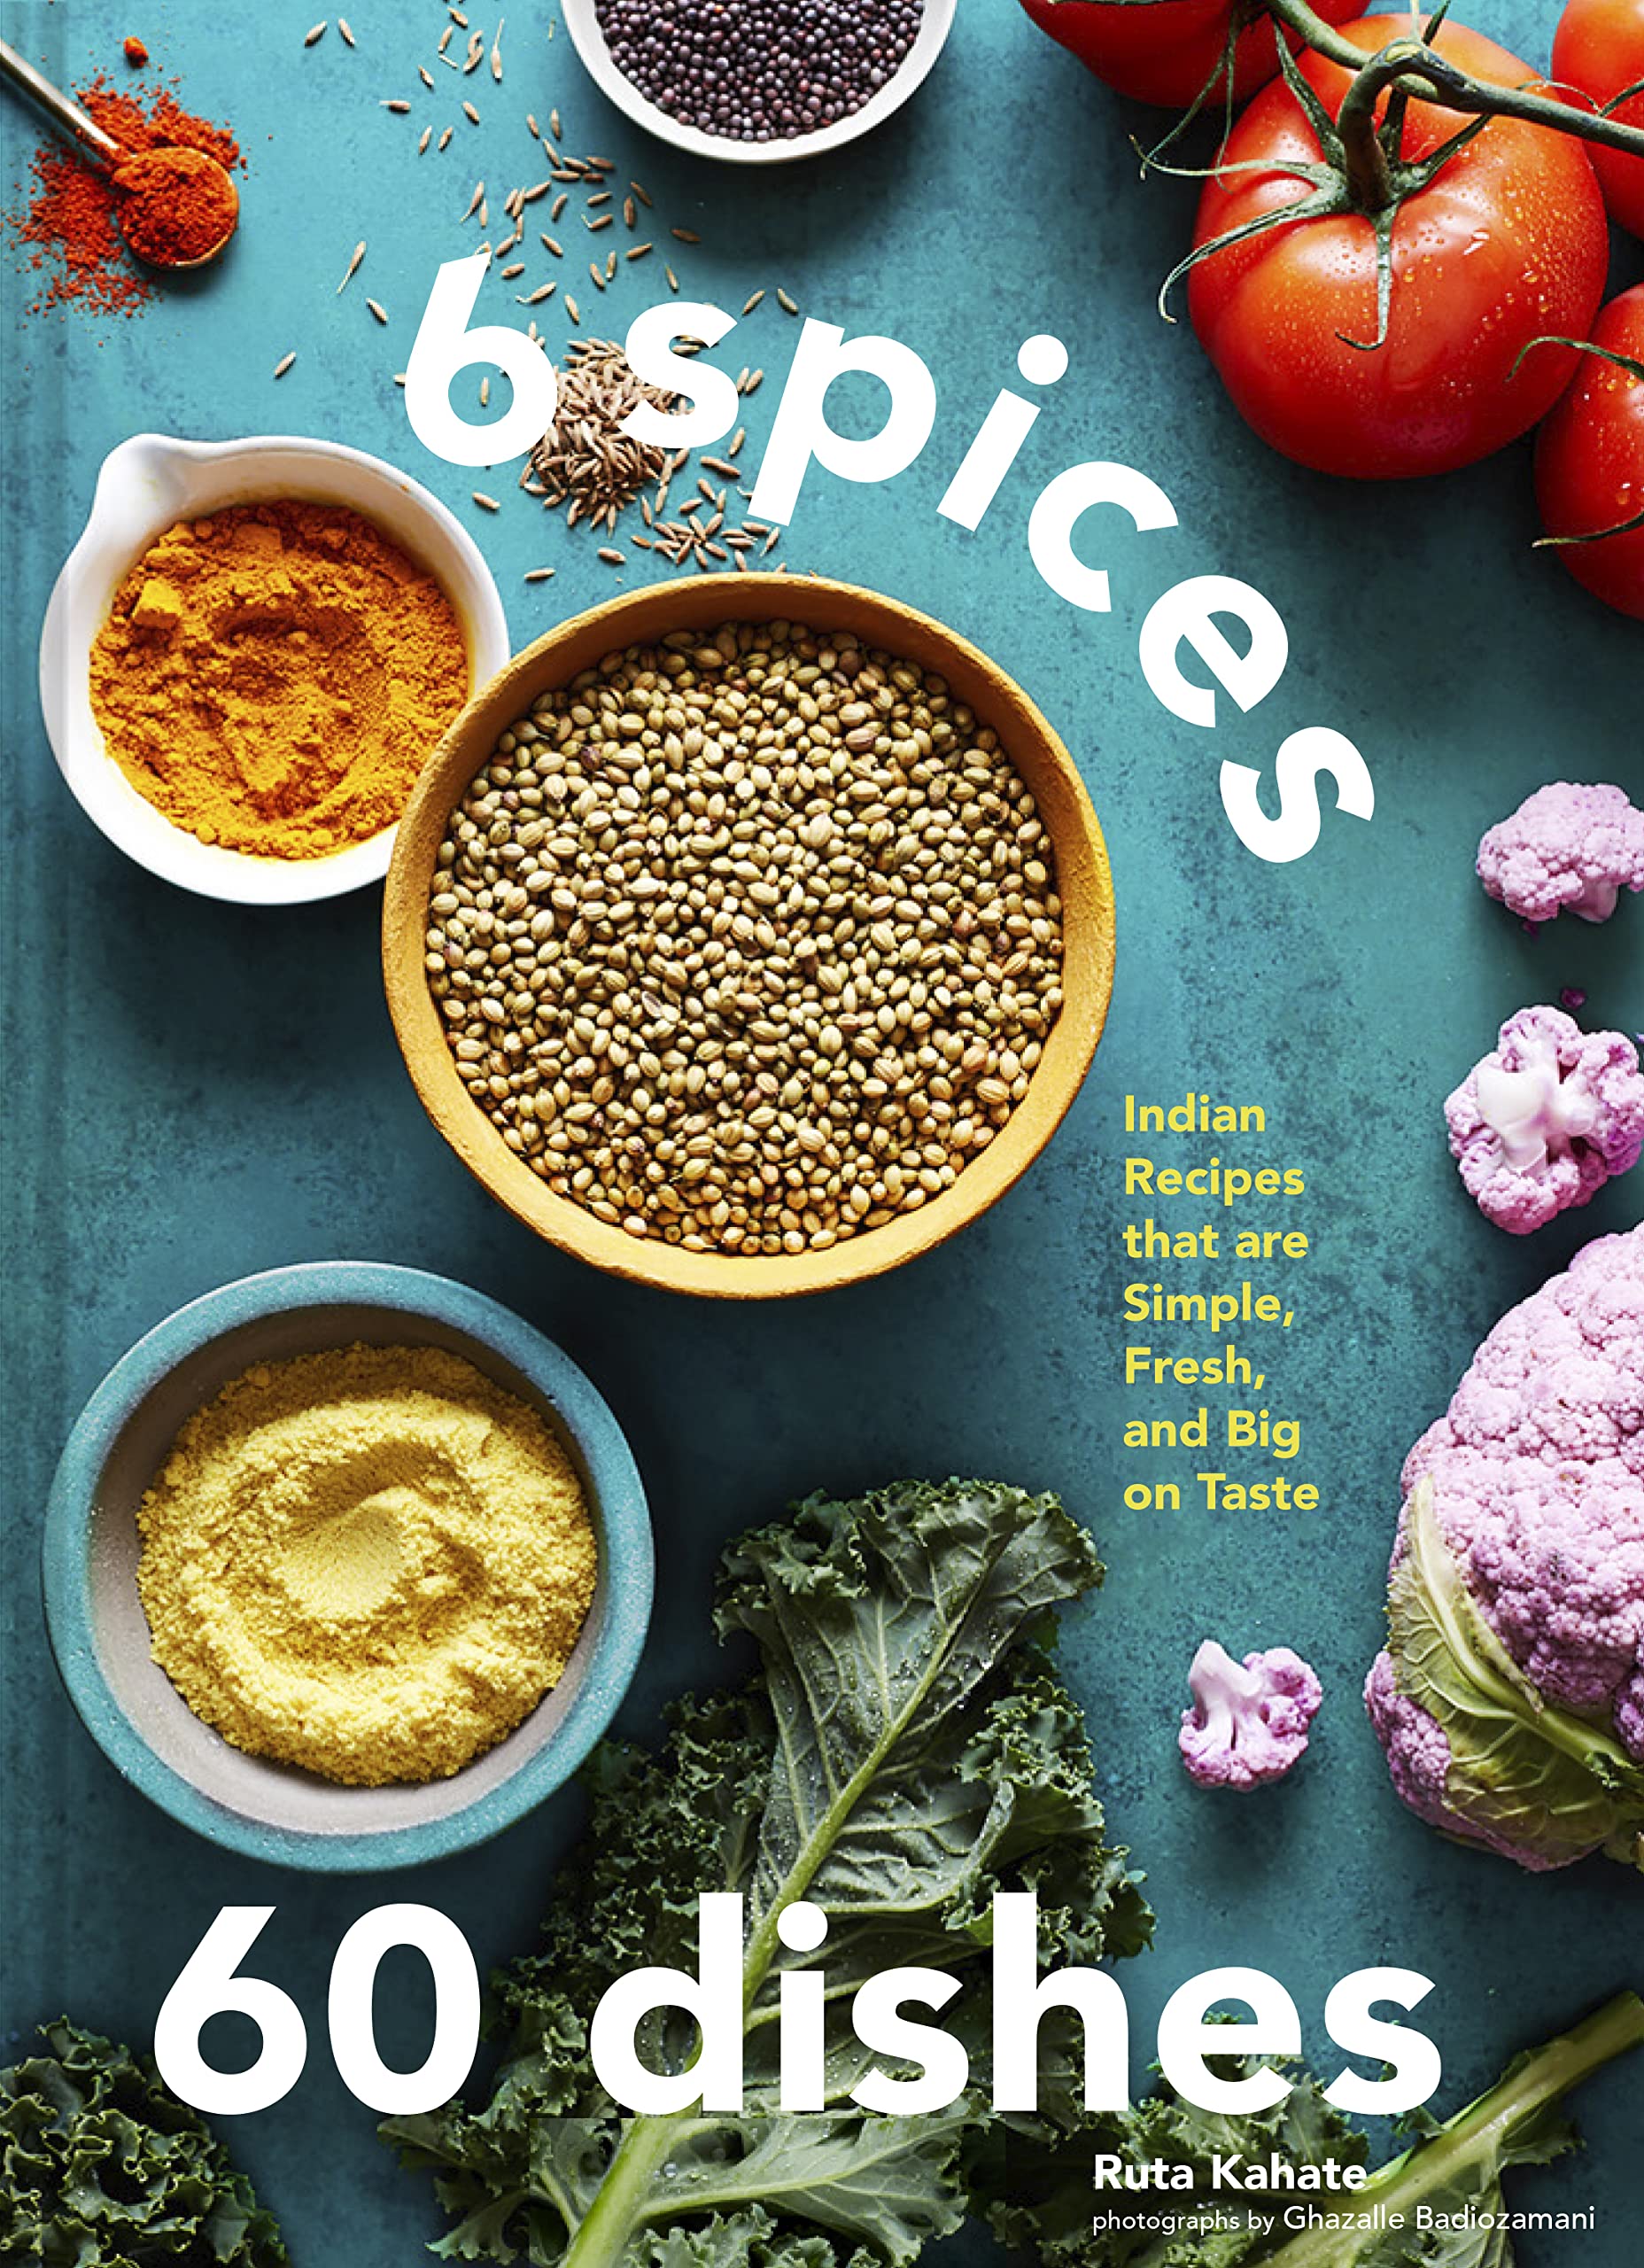 6 Spices, 60 Dishes: Indian Recipes That Are Simple, Fresh, and Big on Taste (Ruta Kahate)